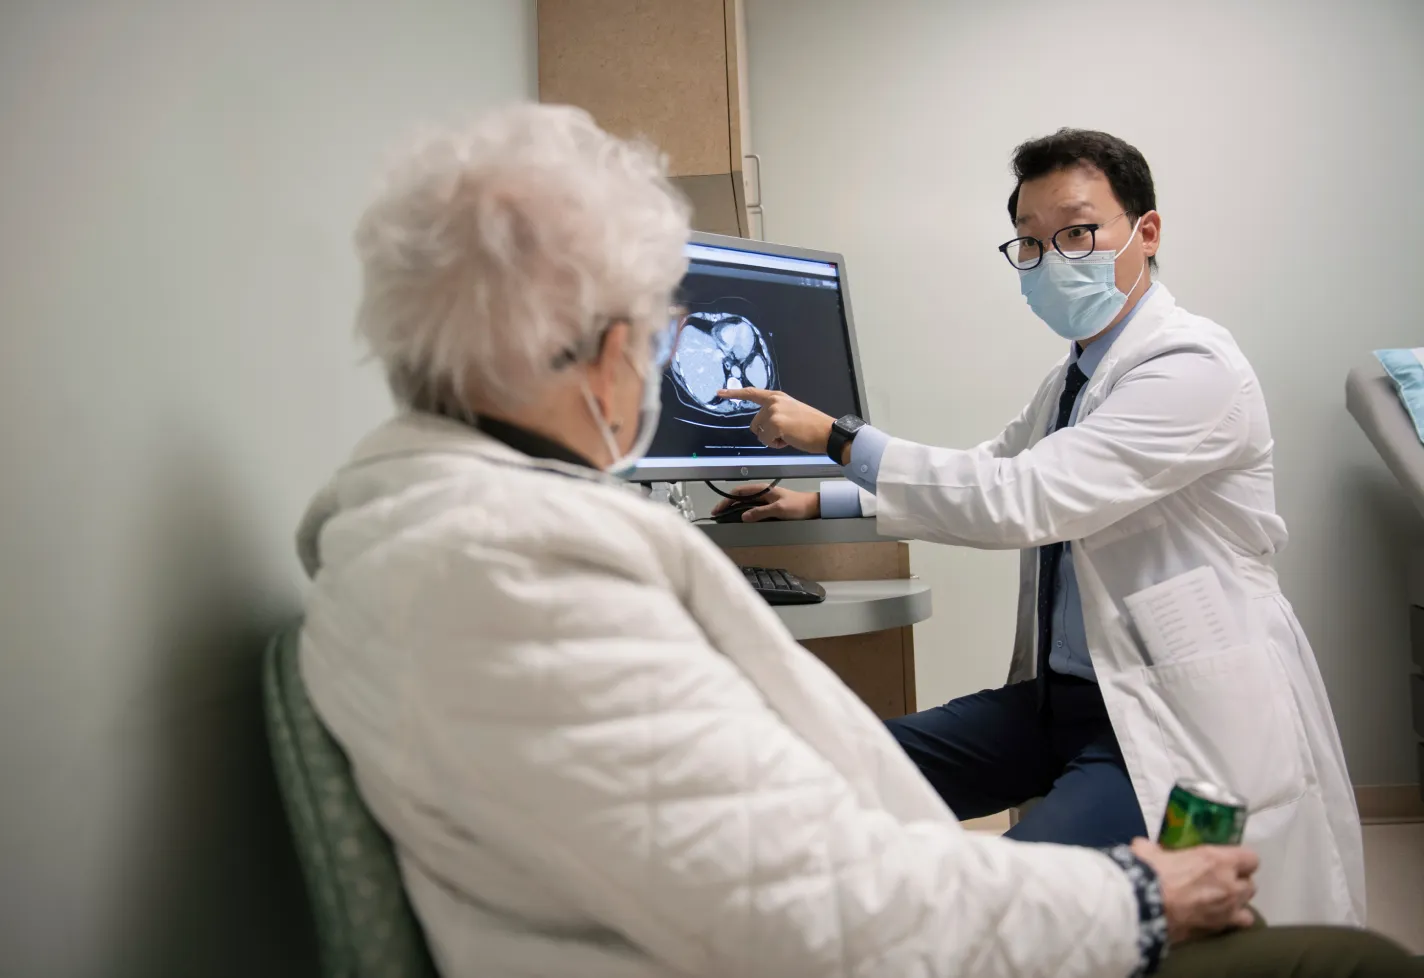 Dr. An is reviewing a scan with a patient.